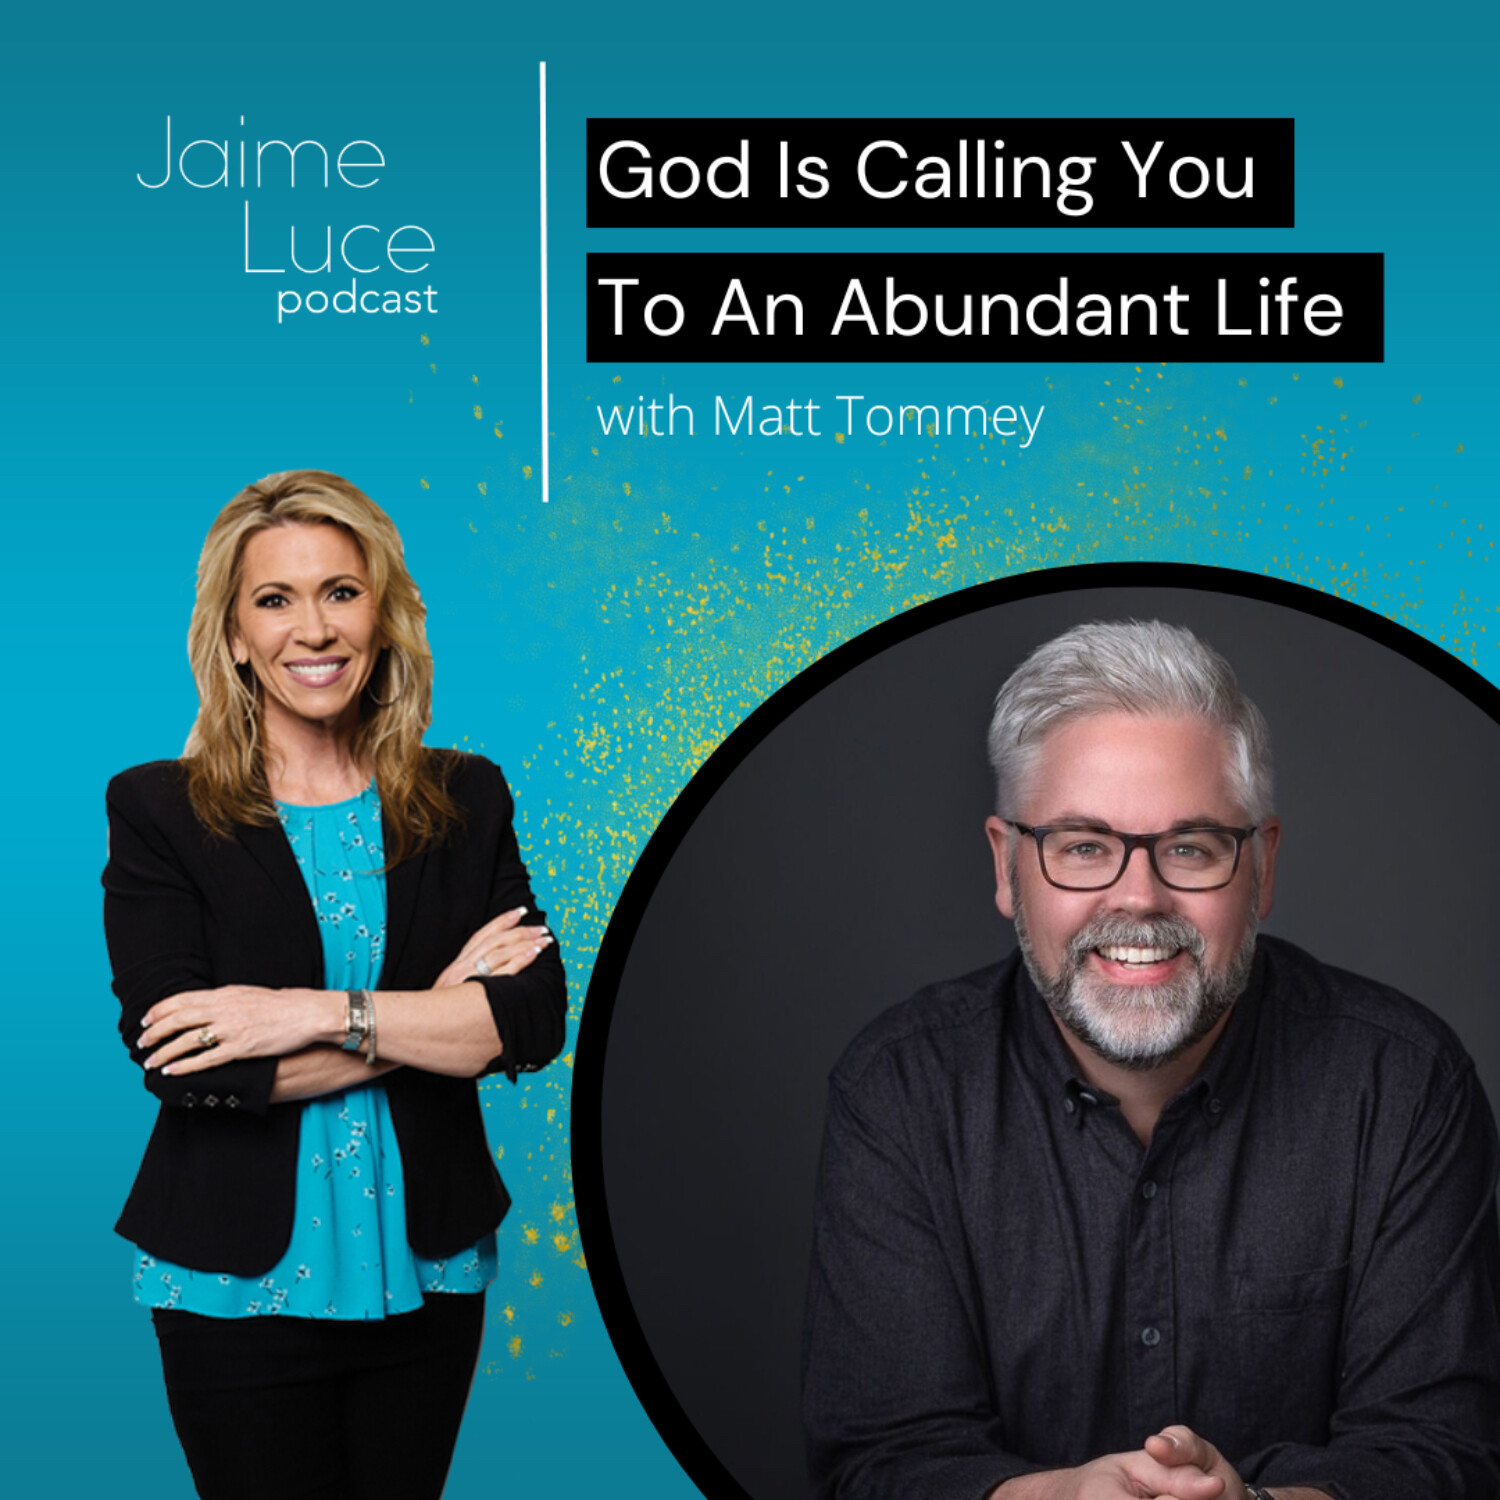 God Is Calling You To An Abundant Life with Matt Tommey